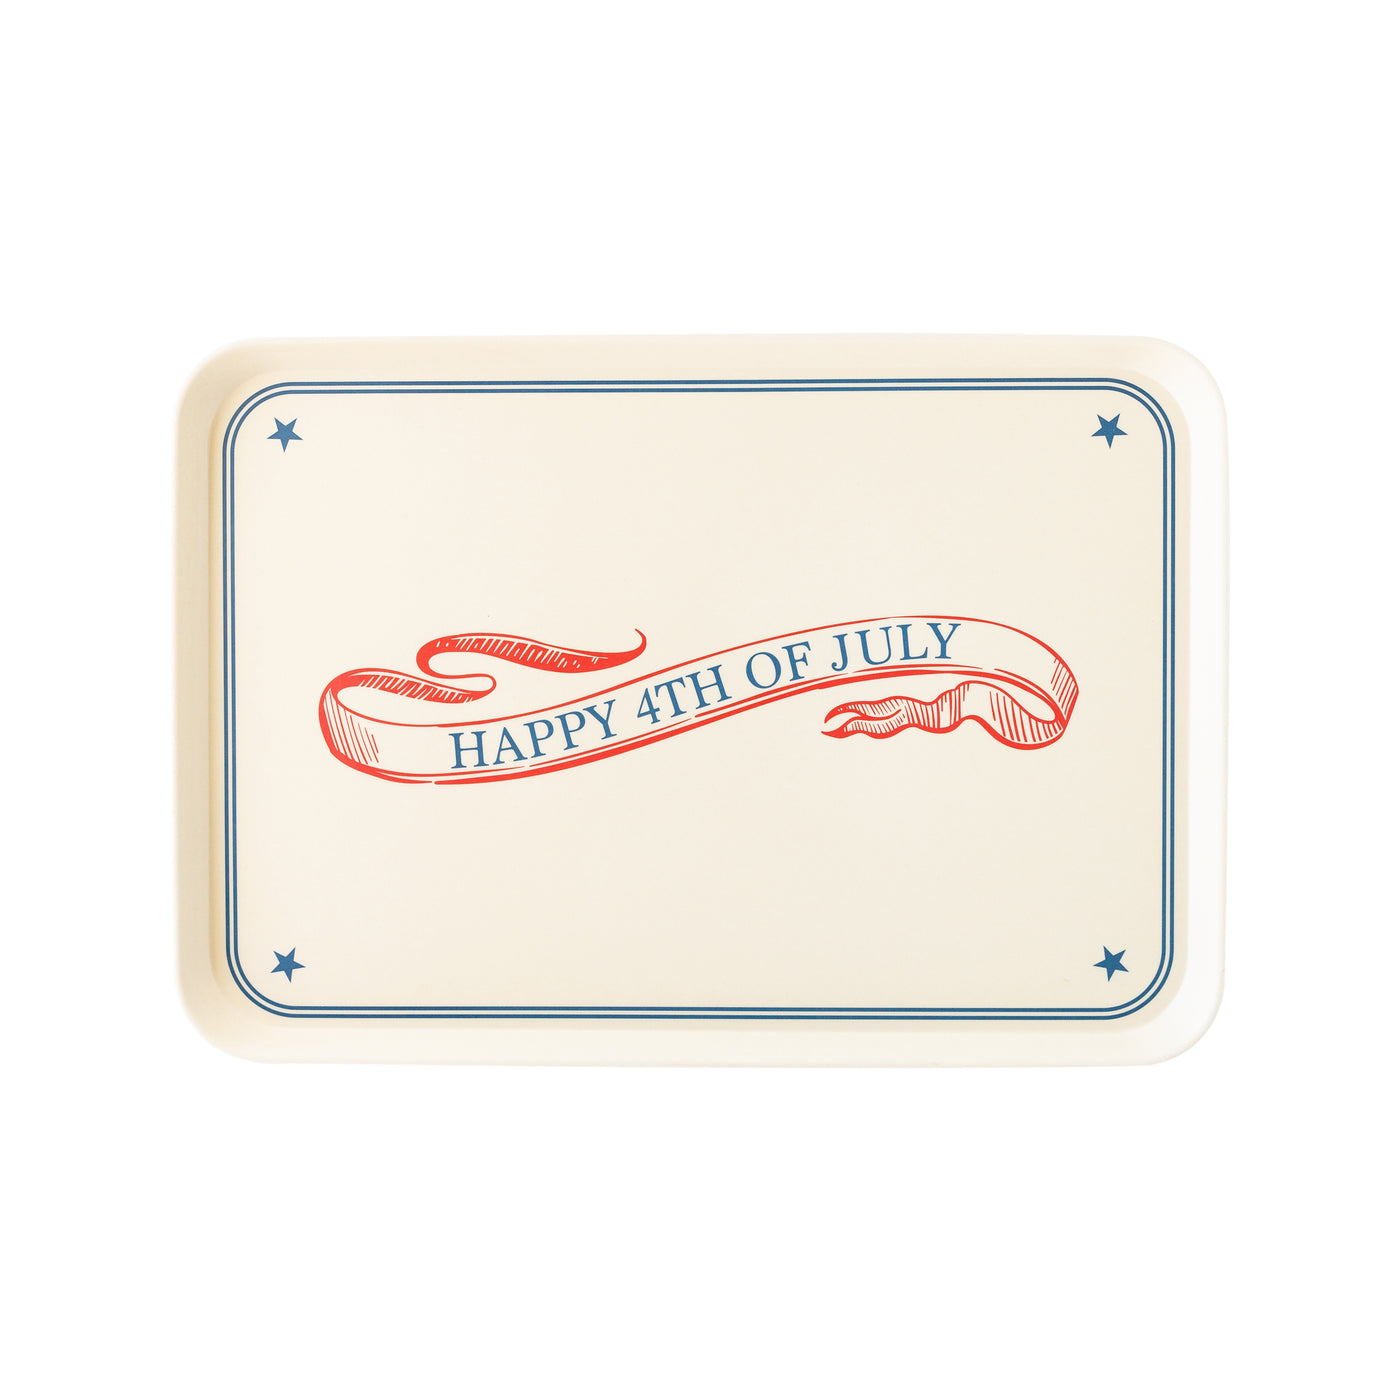 Happy 4th of July Reusable Bamboo Serving Tray